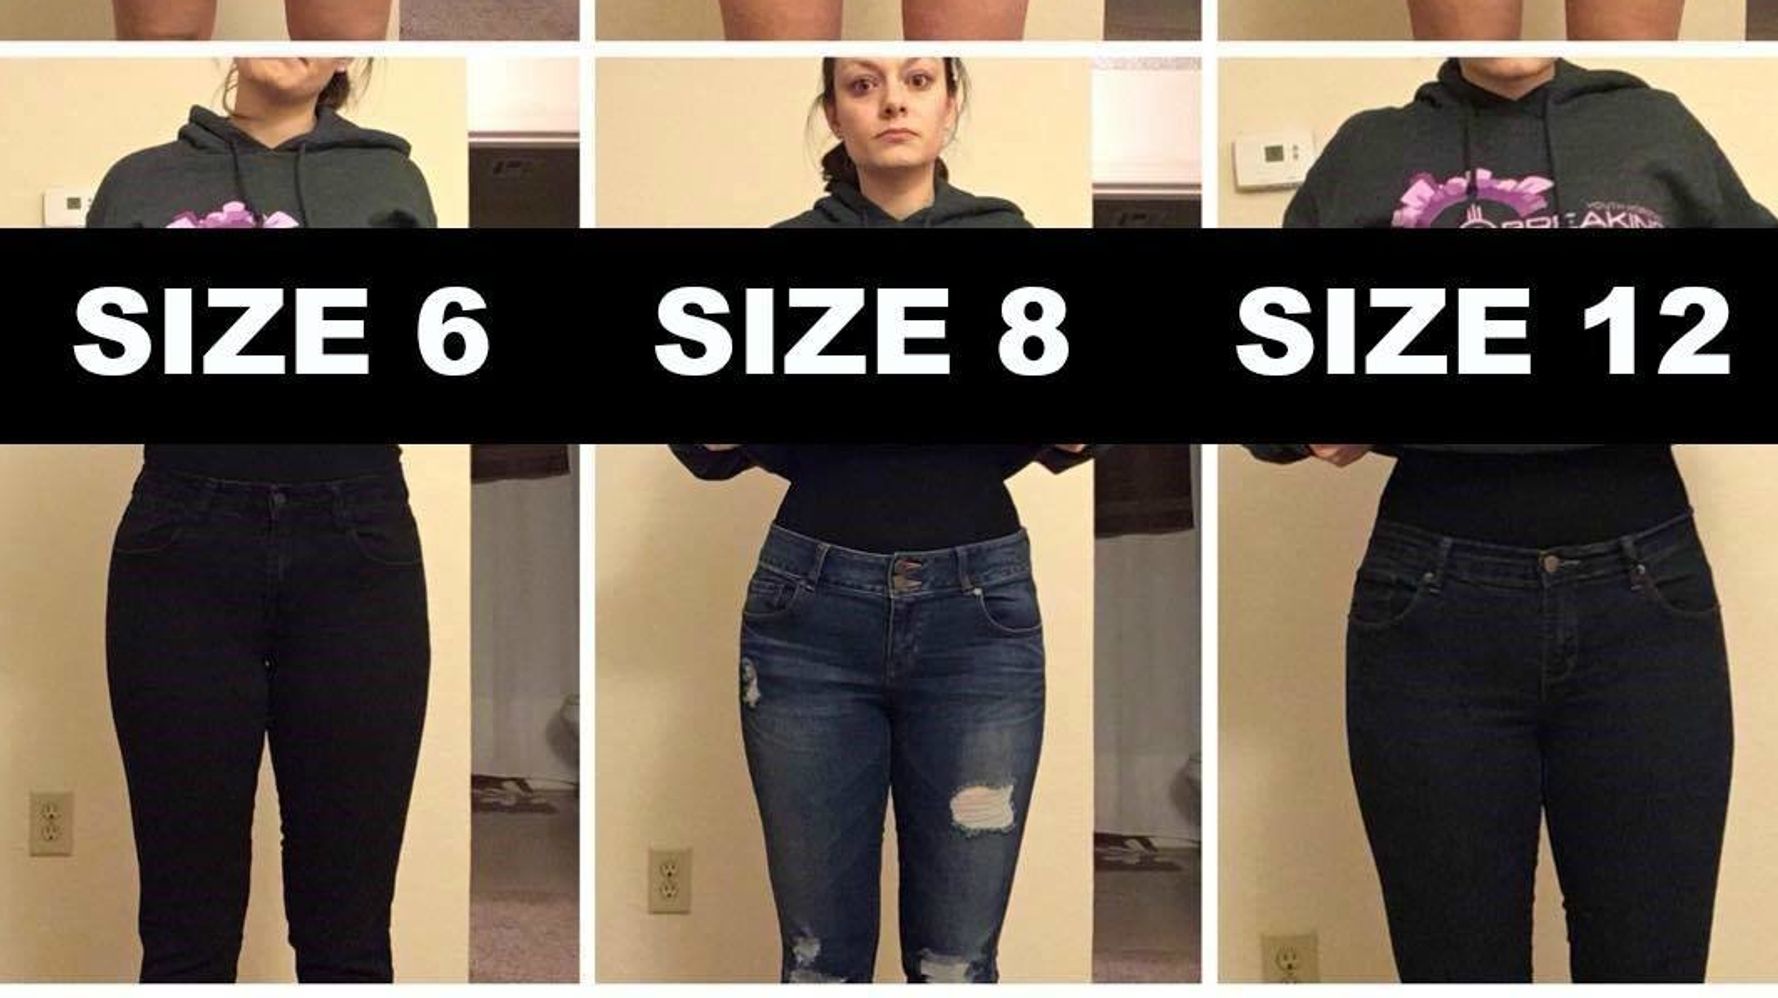 Woman Poses In Varying Pants Sizes To Make A Point About Body